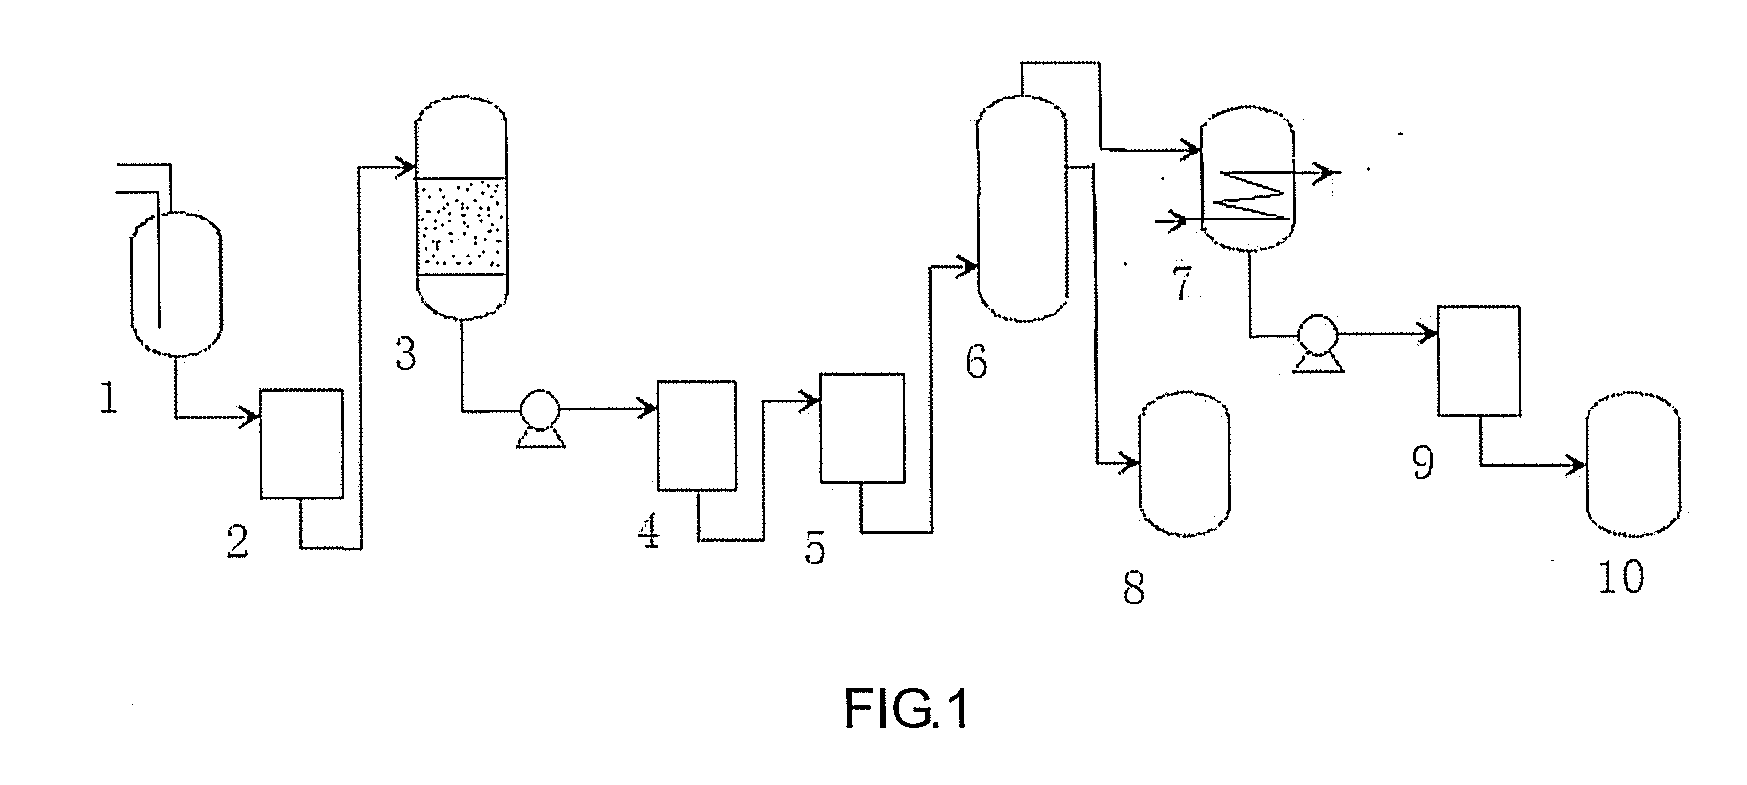 Method for producing of ultra-clean and high-purity n-methyl pyrrolidone